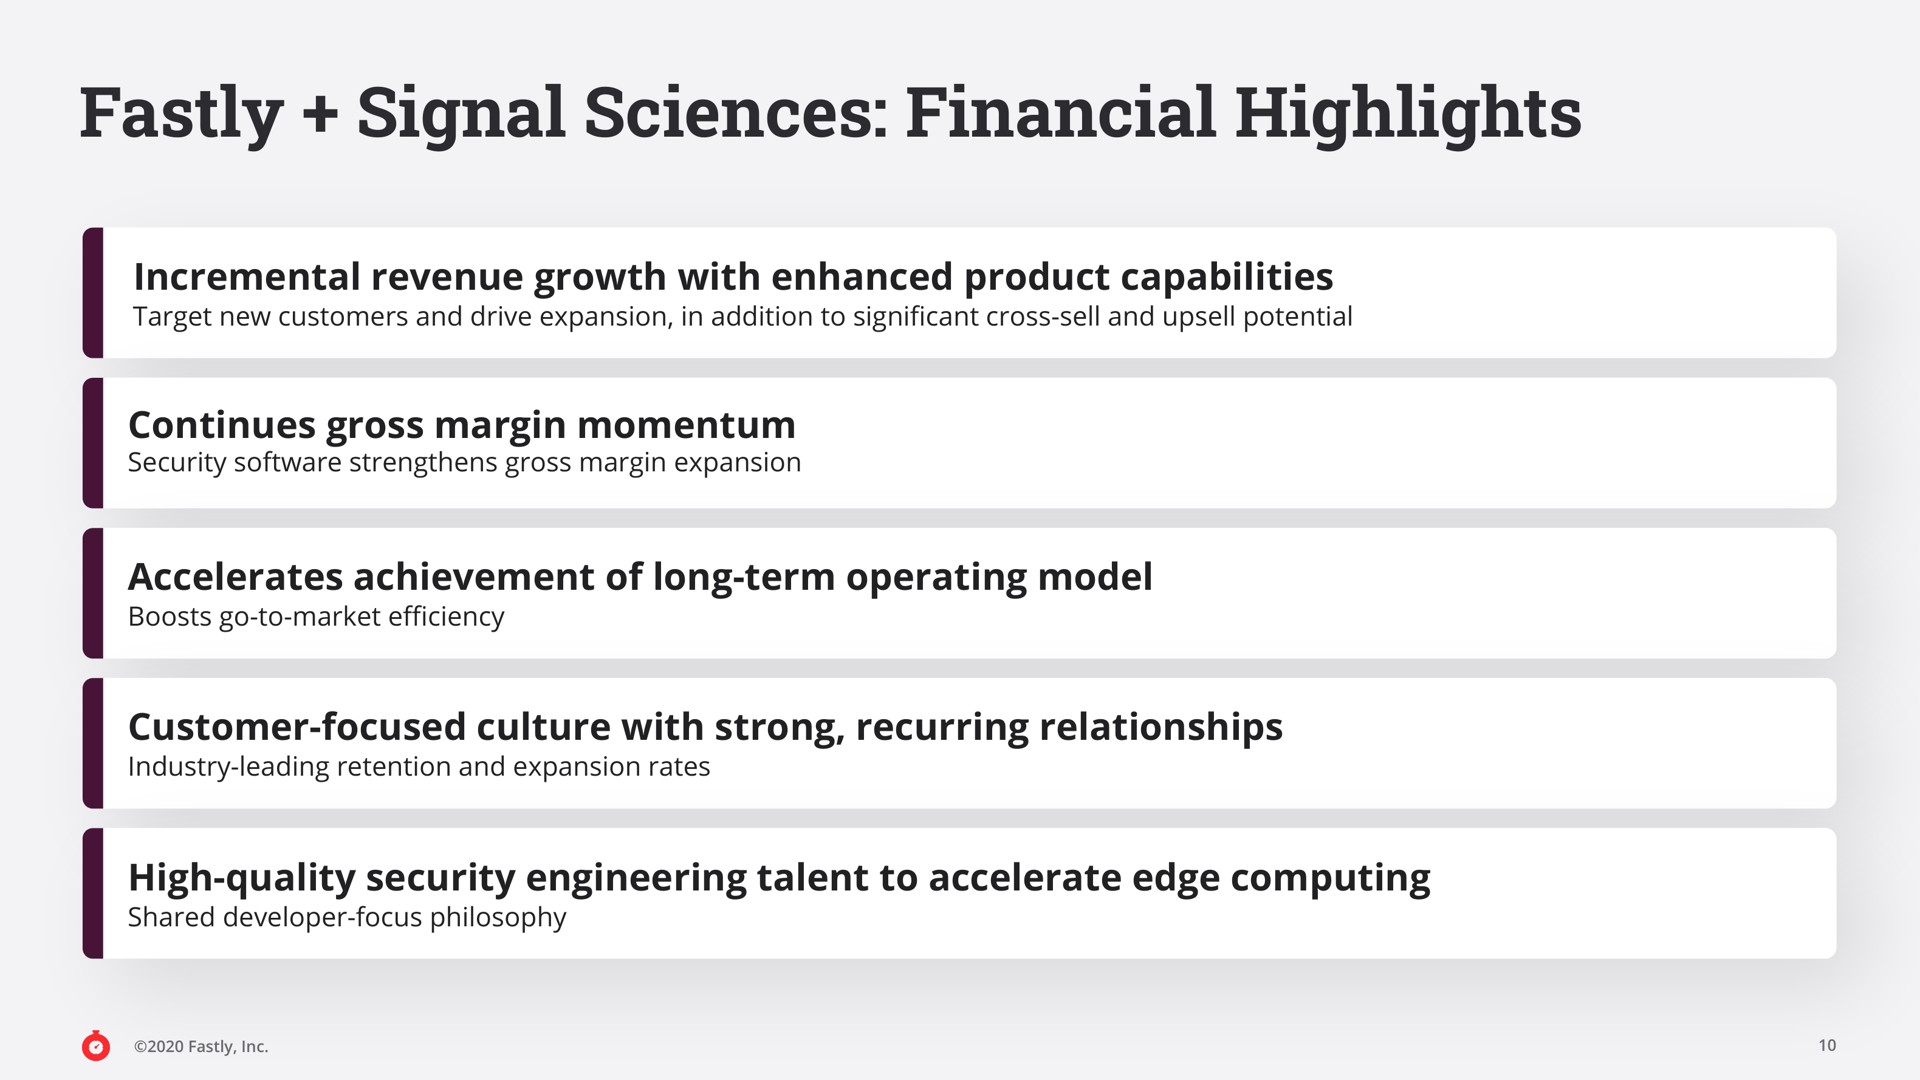 signal sciences financial highlights | Fastly